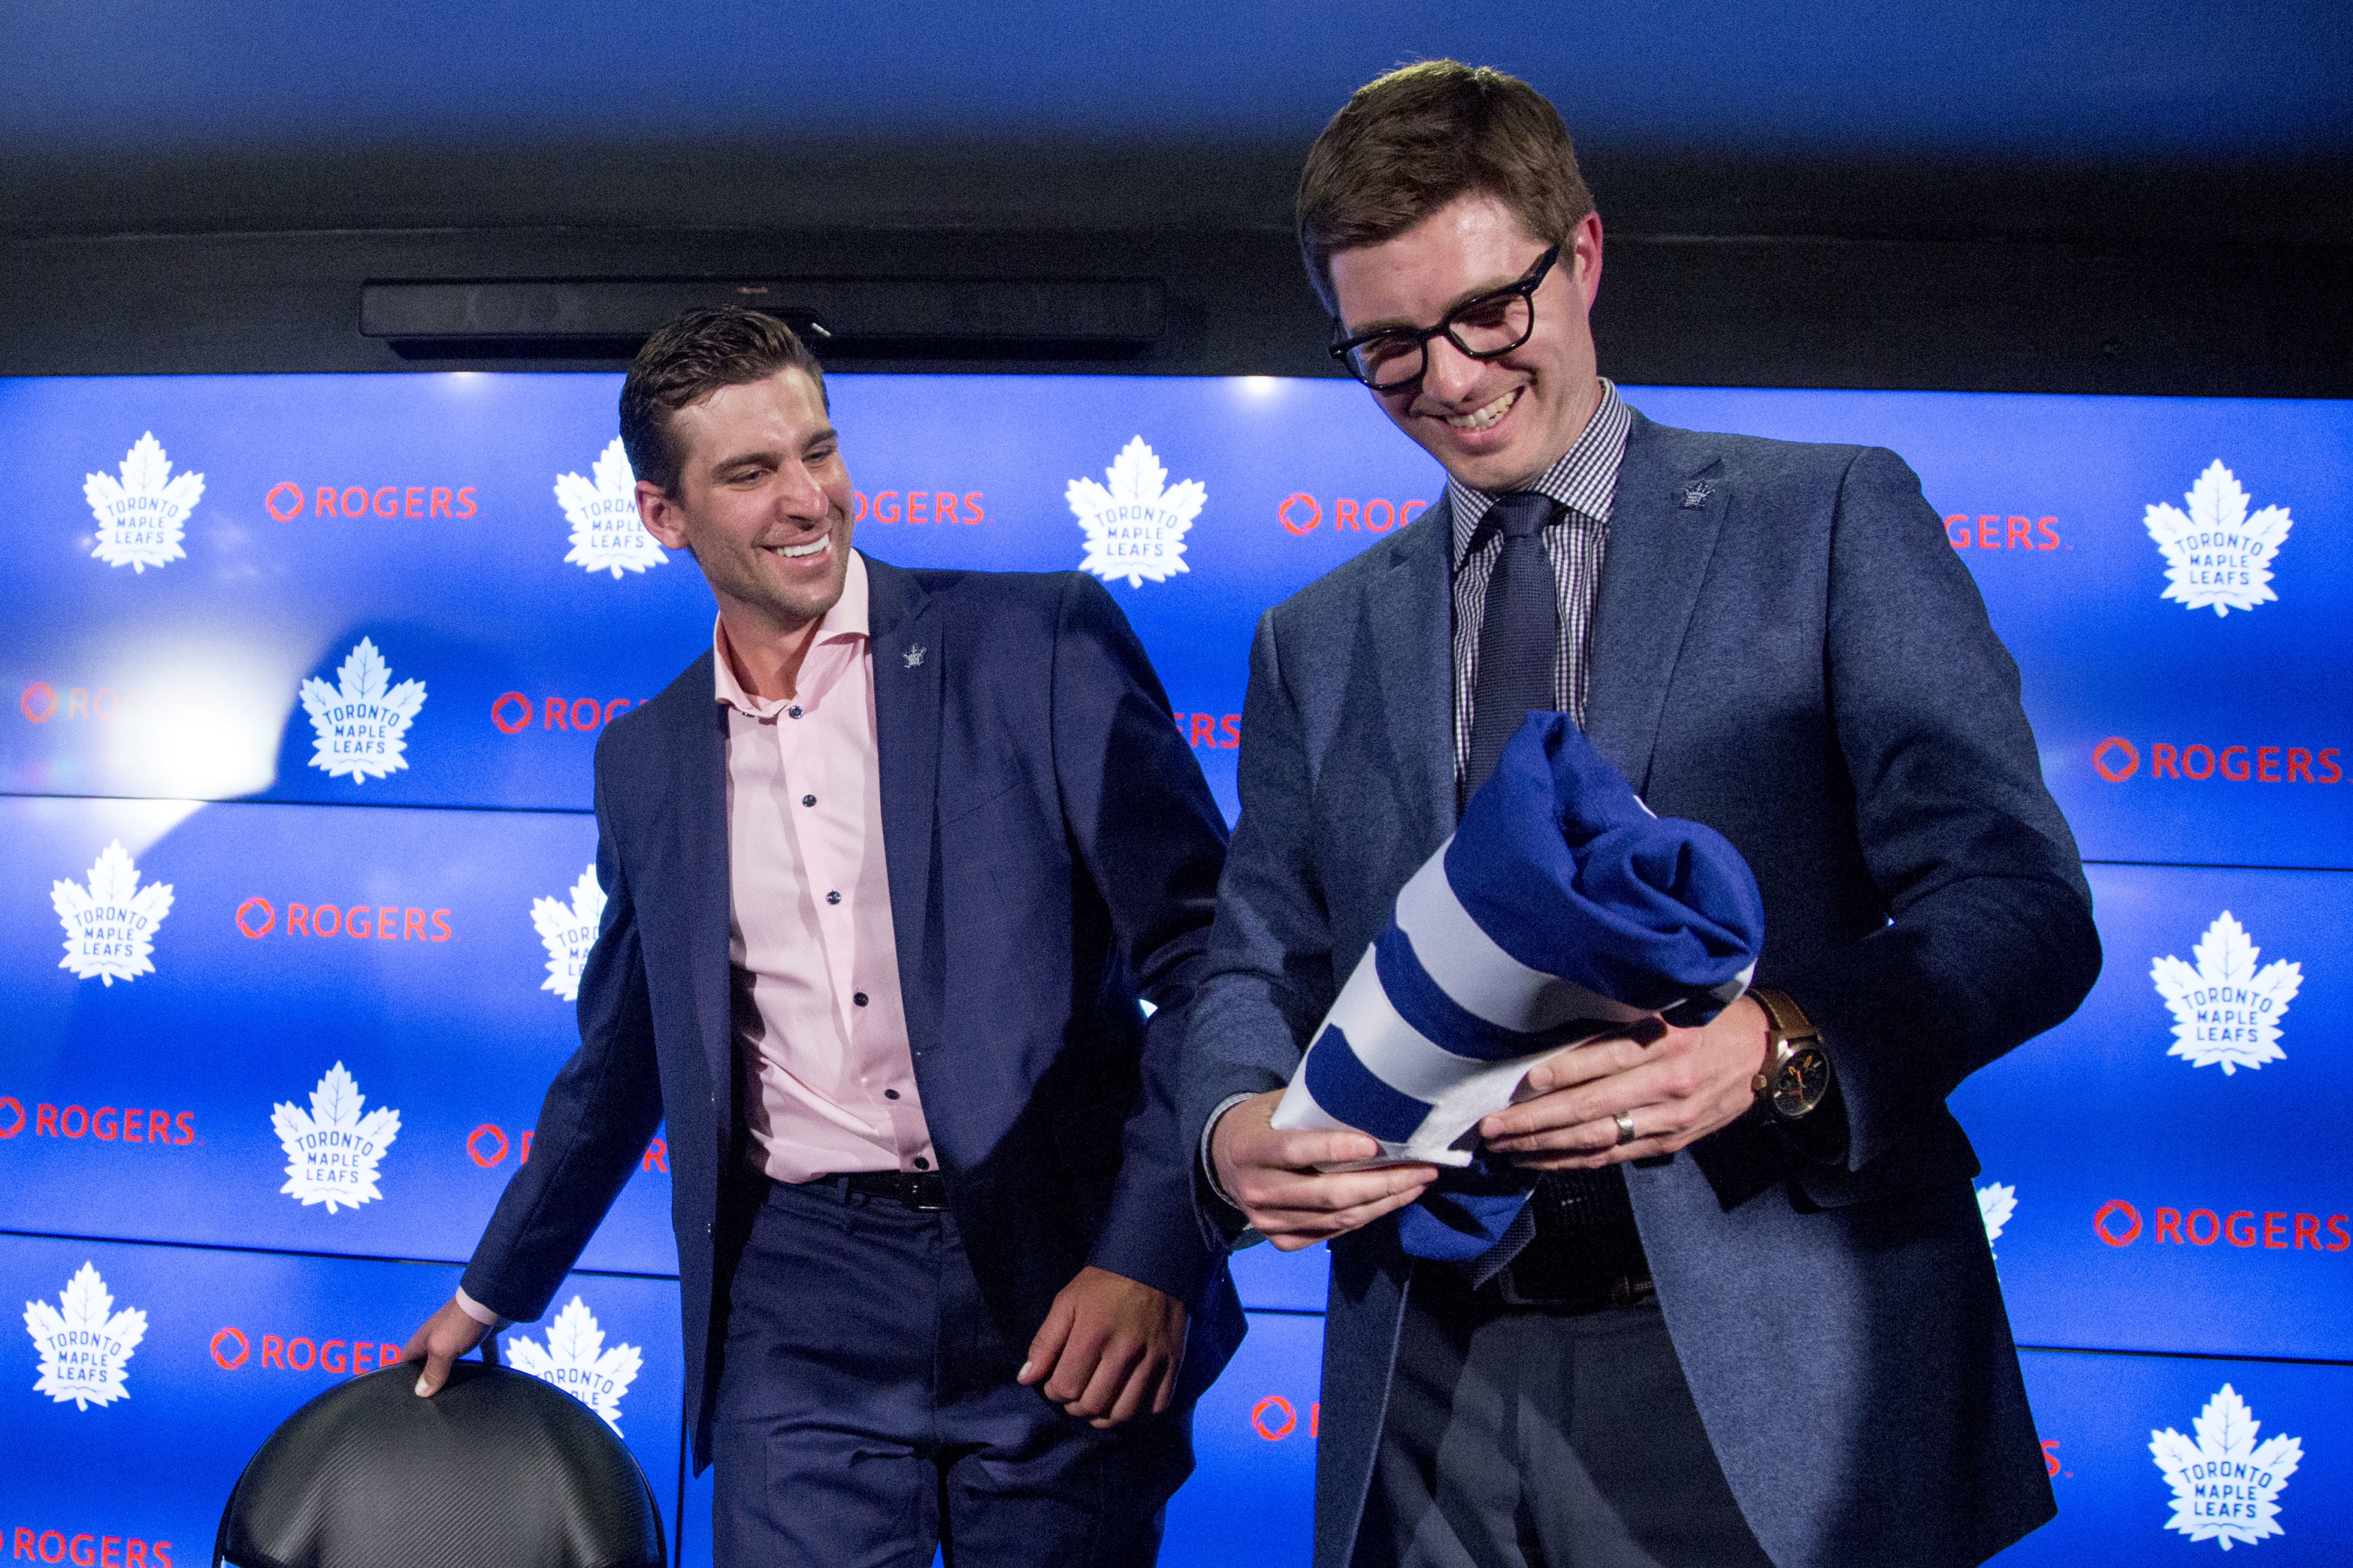 The jersey of John Tavares of the Toronto Maple Leafs, hangs in the News  Photo - Getty Images